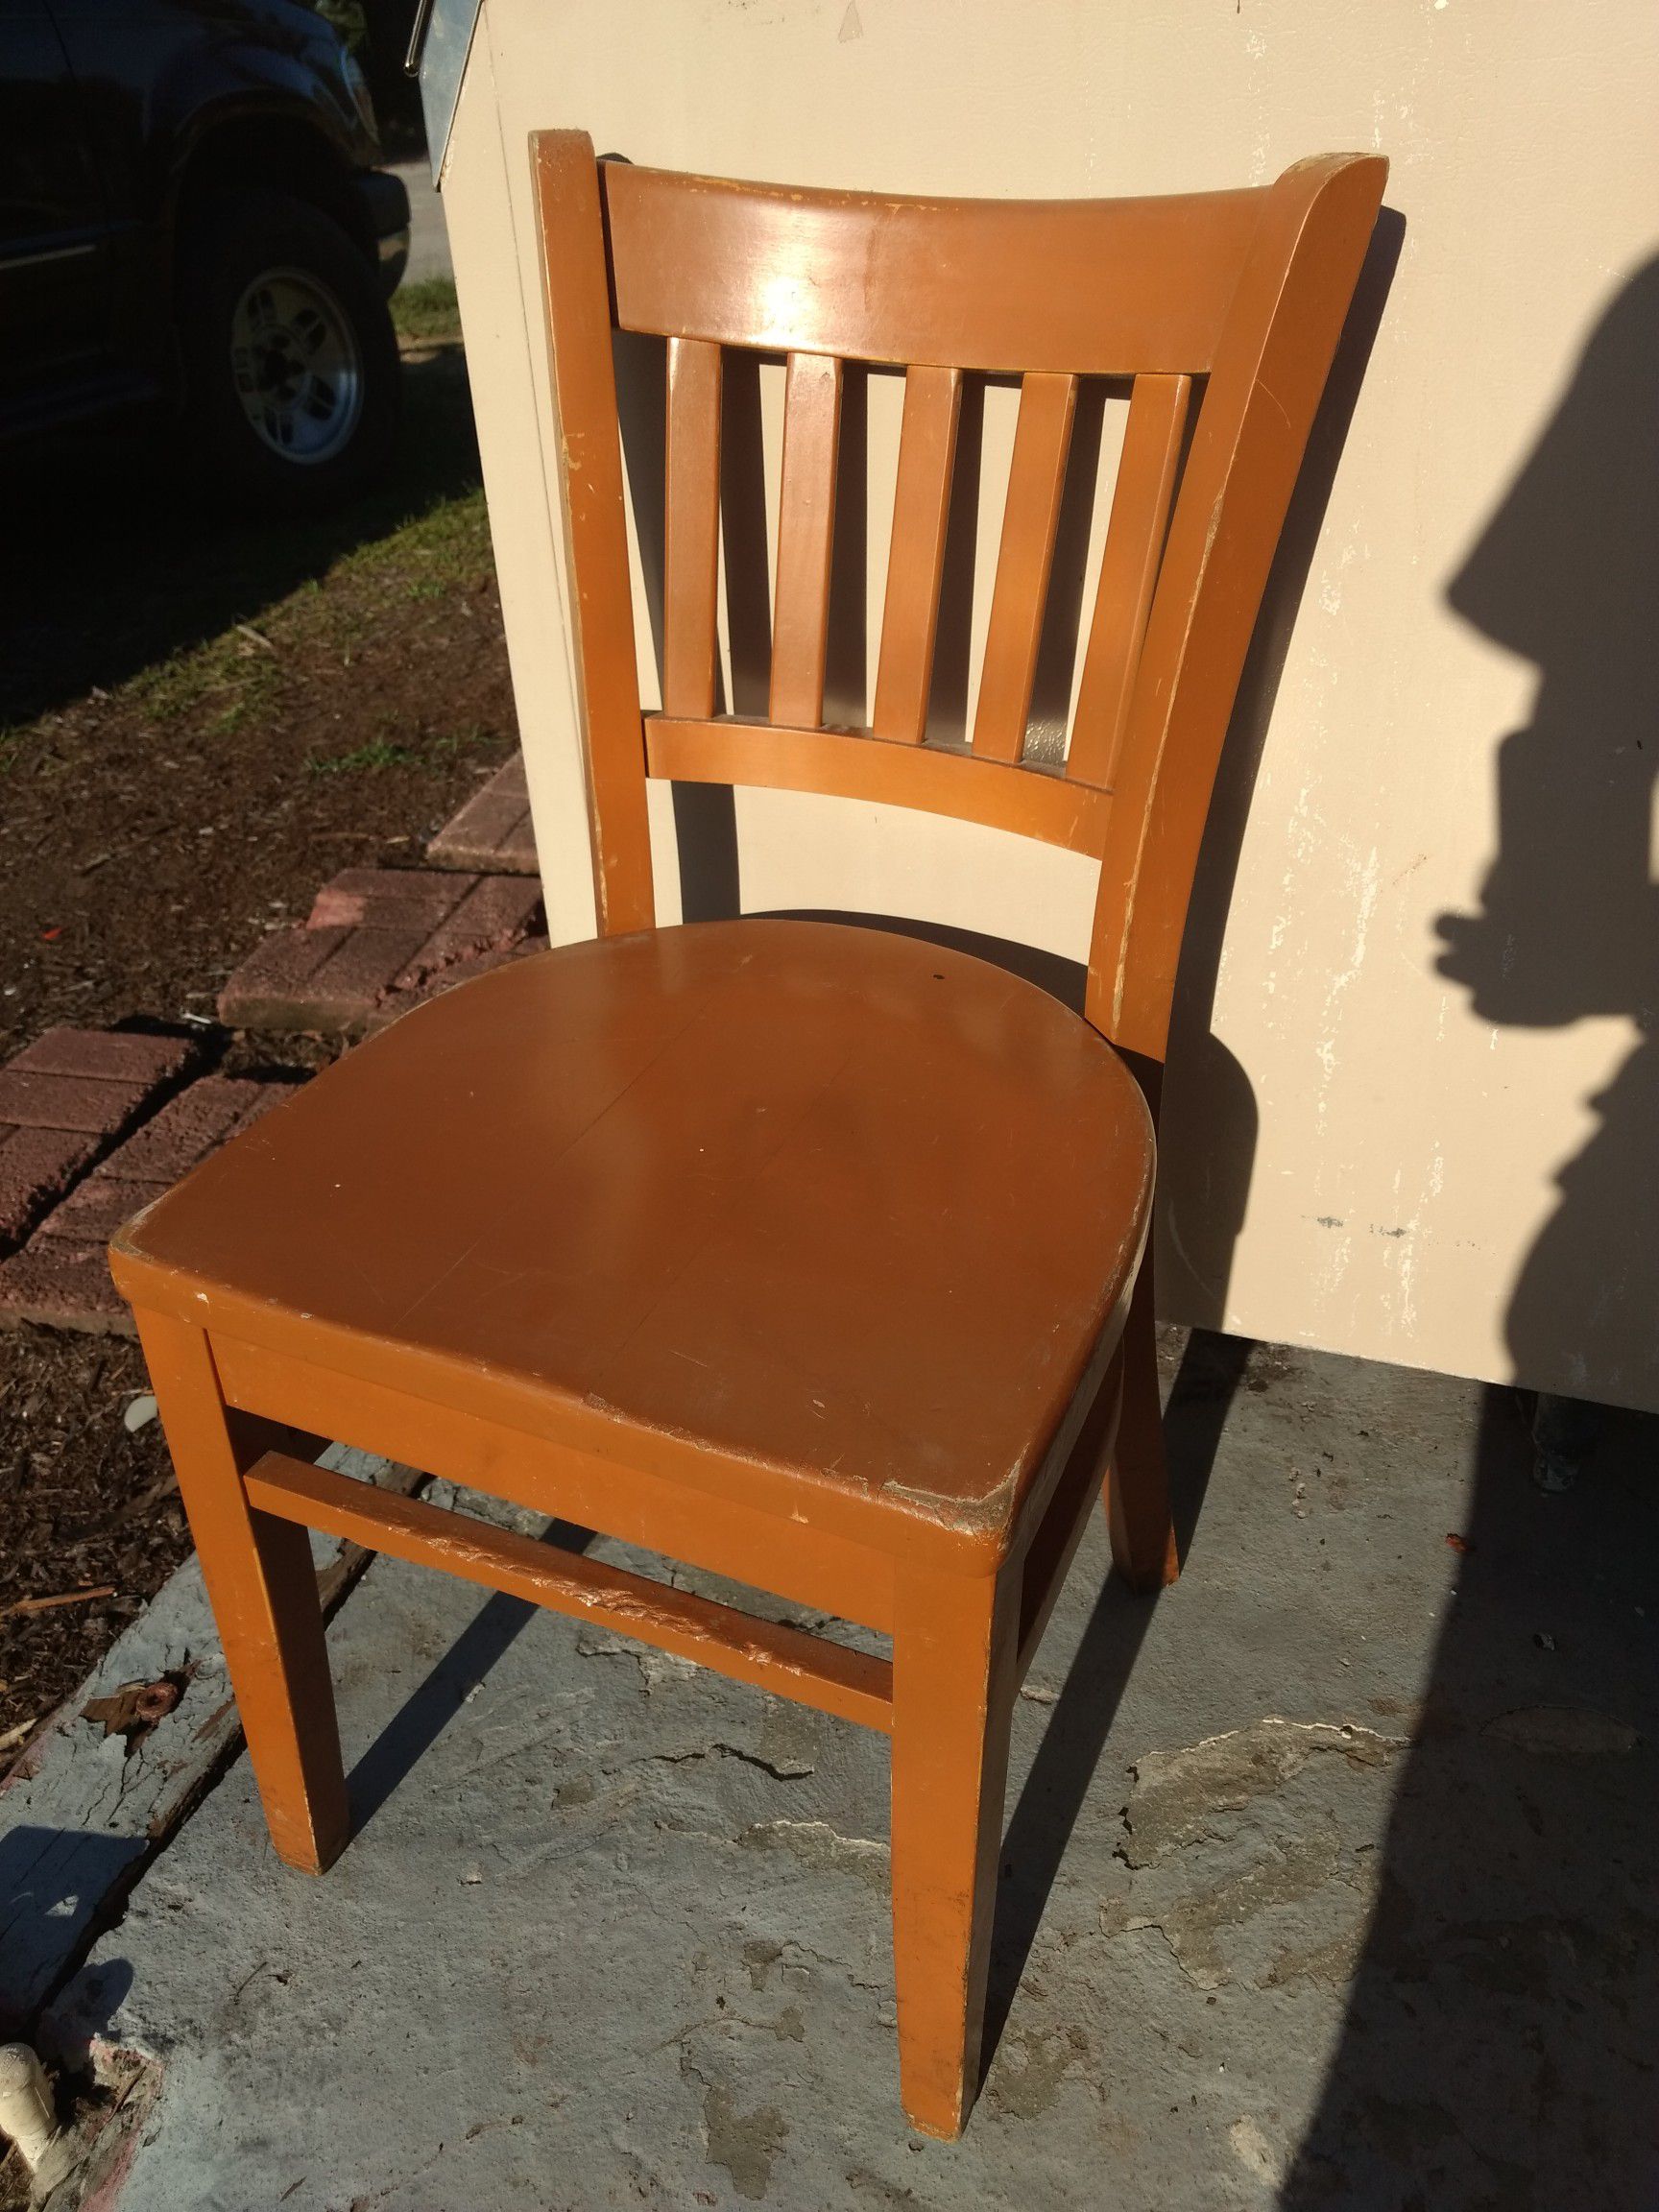 4 Matching All Wooden Chairs